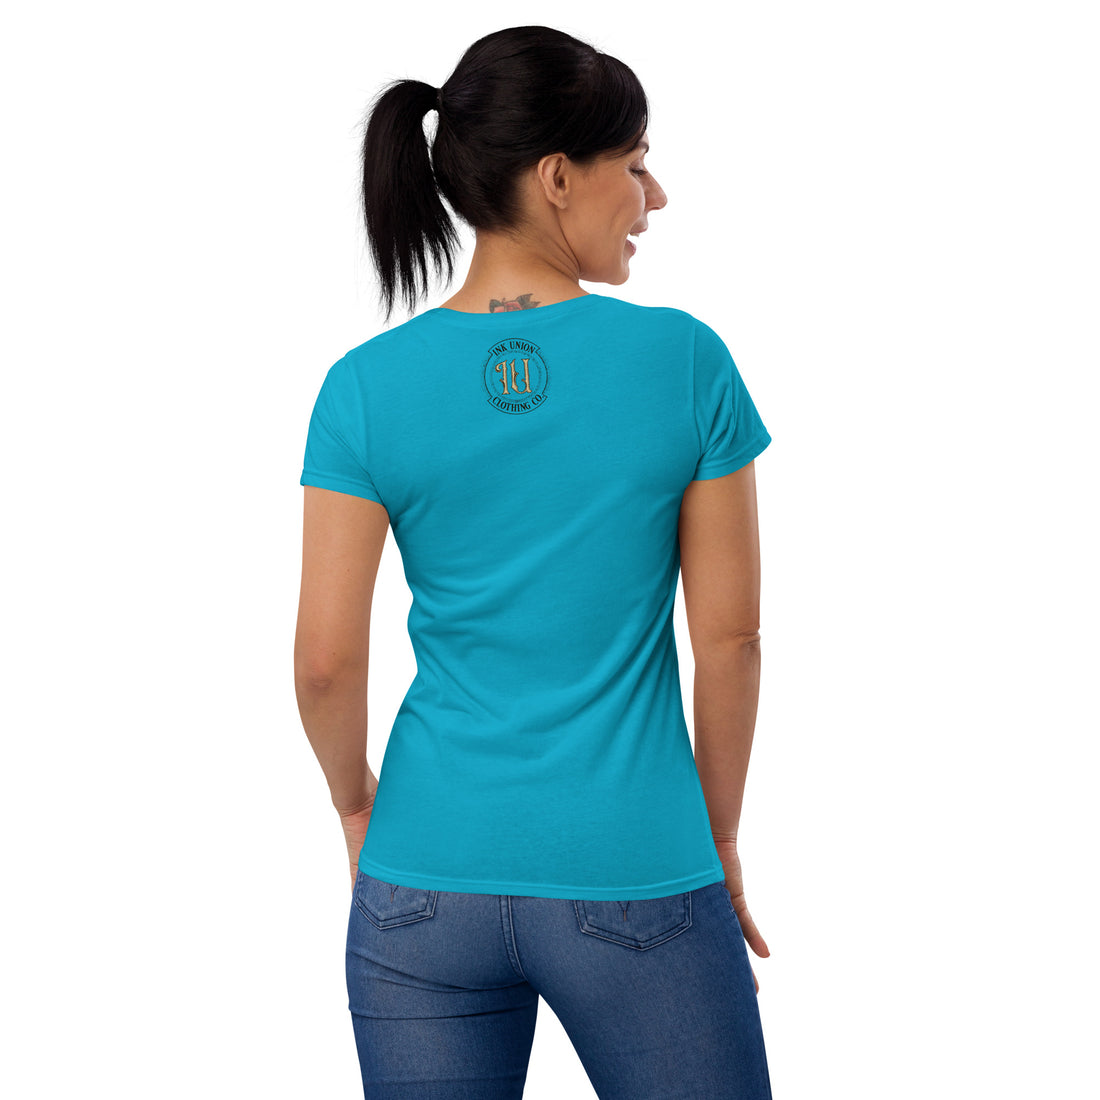 The back view of an attractive woman wearing a light blue t-shirt with a small gold and black Ink Union badge Logo centered just under the neckline.